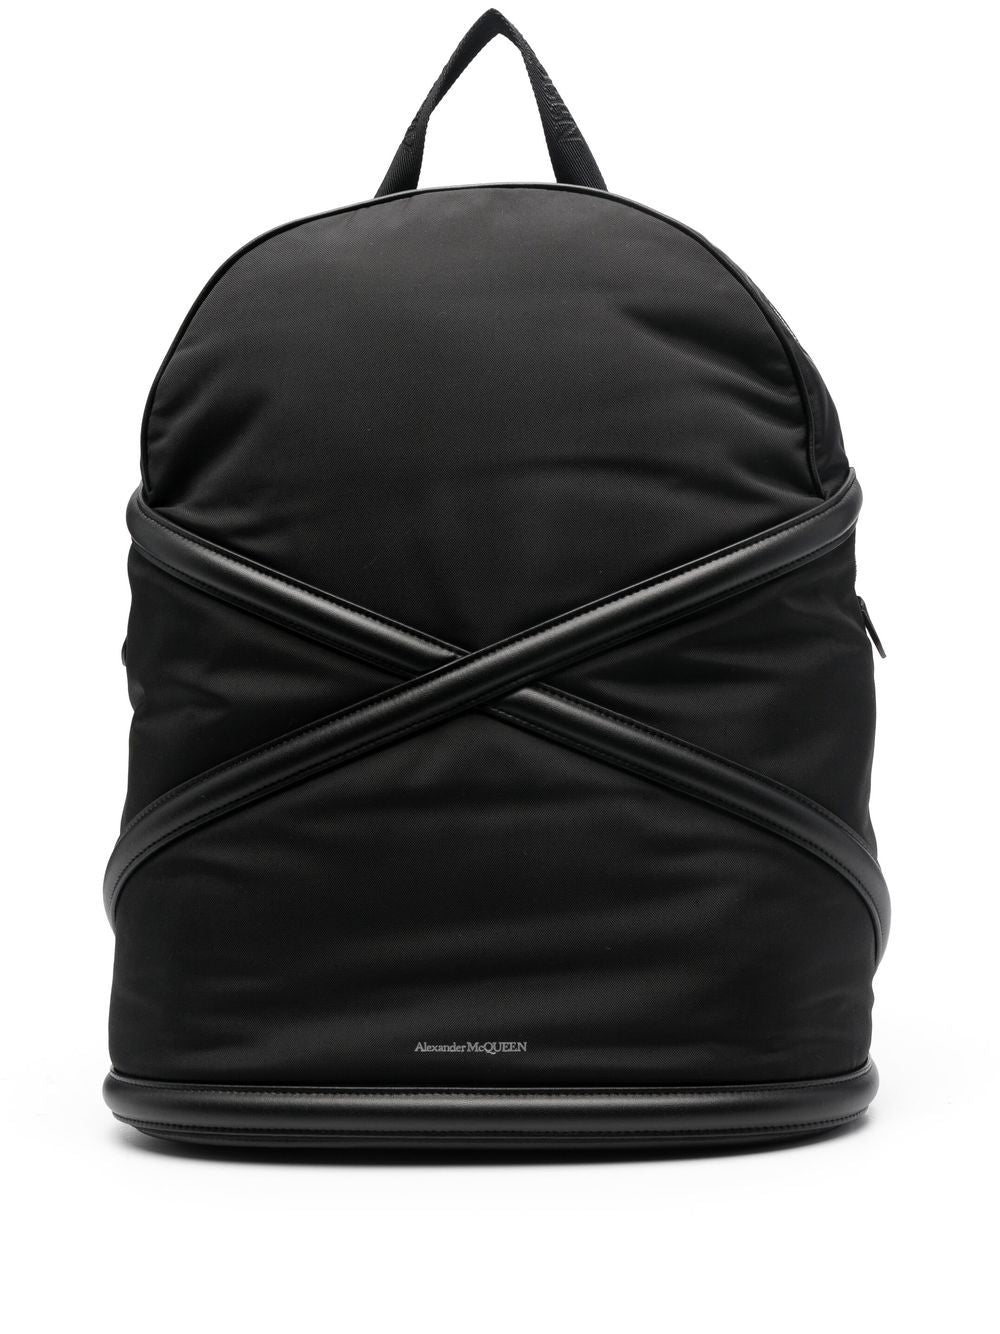 ALEXANDER MCQUEEN Nylon Harness Backpack with Leather Straps and Contrast Logo Print for Men